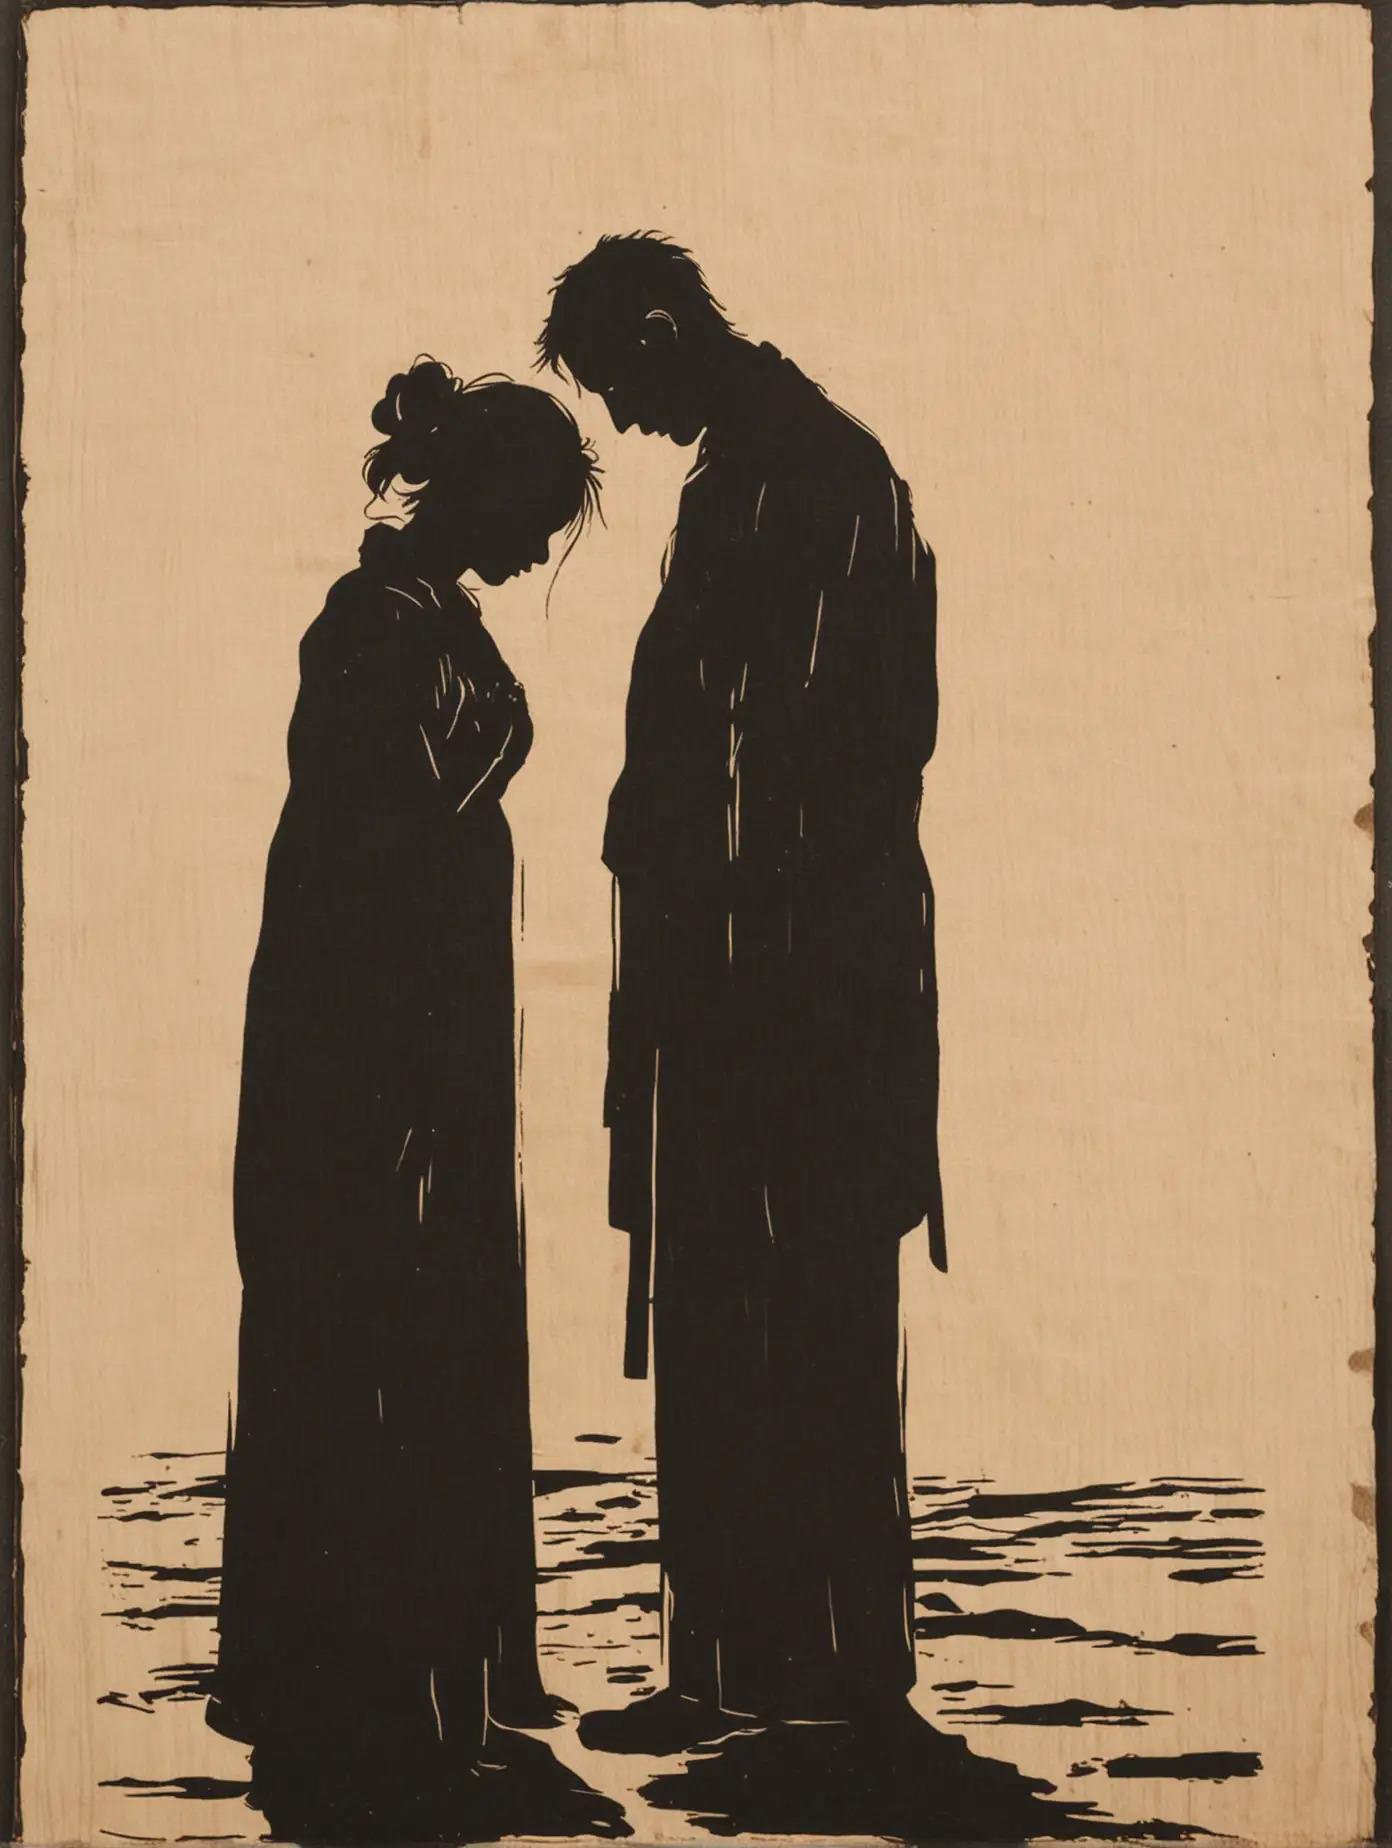 A simple woodblock print in the lines of a silhouette of a woman and a man with head bowed down